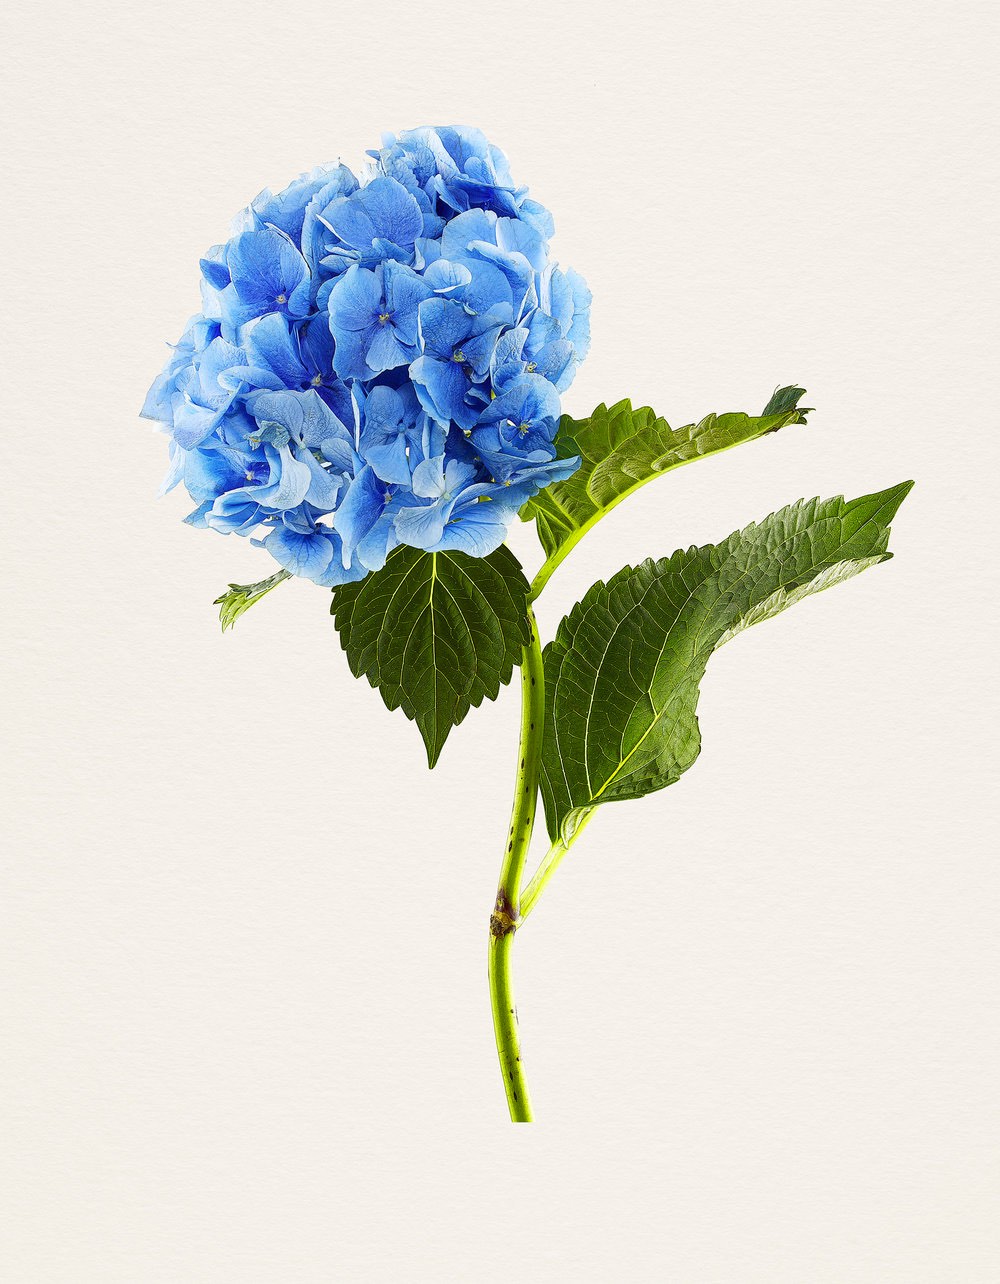 Hyperrealistic images of flowers by Kenji Toma